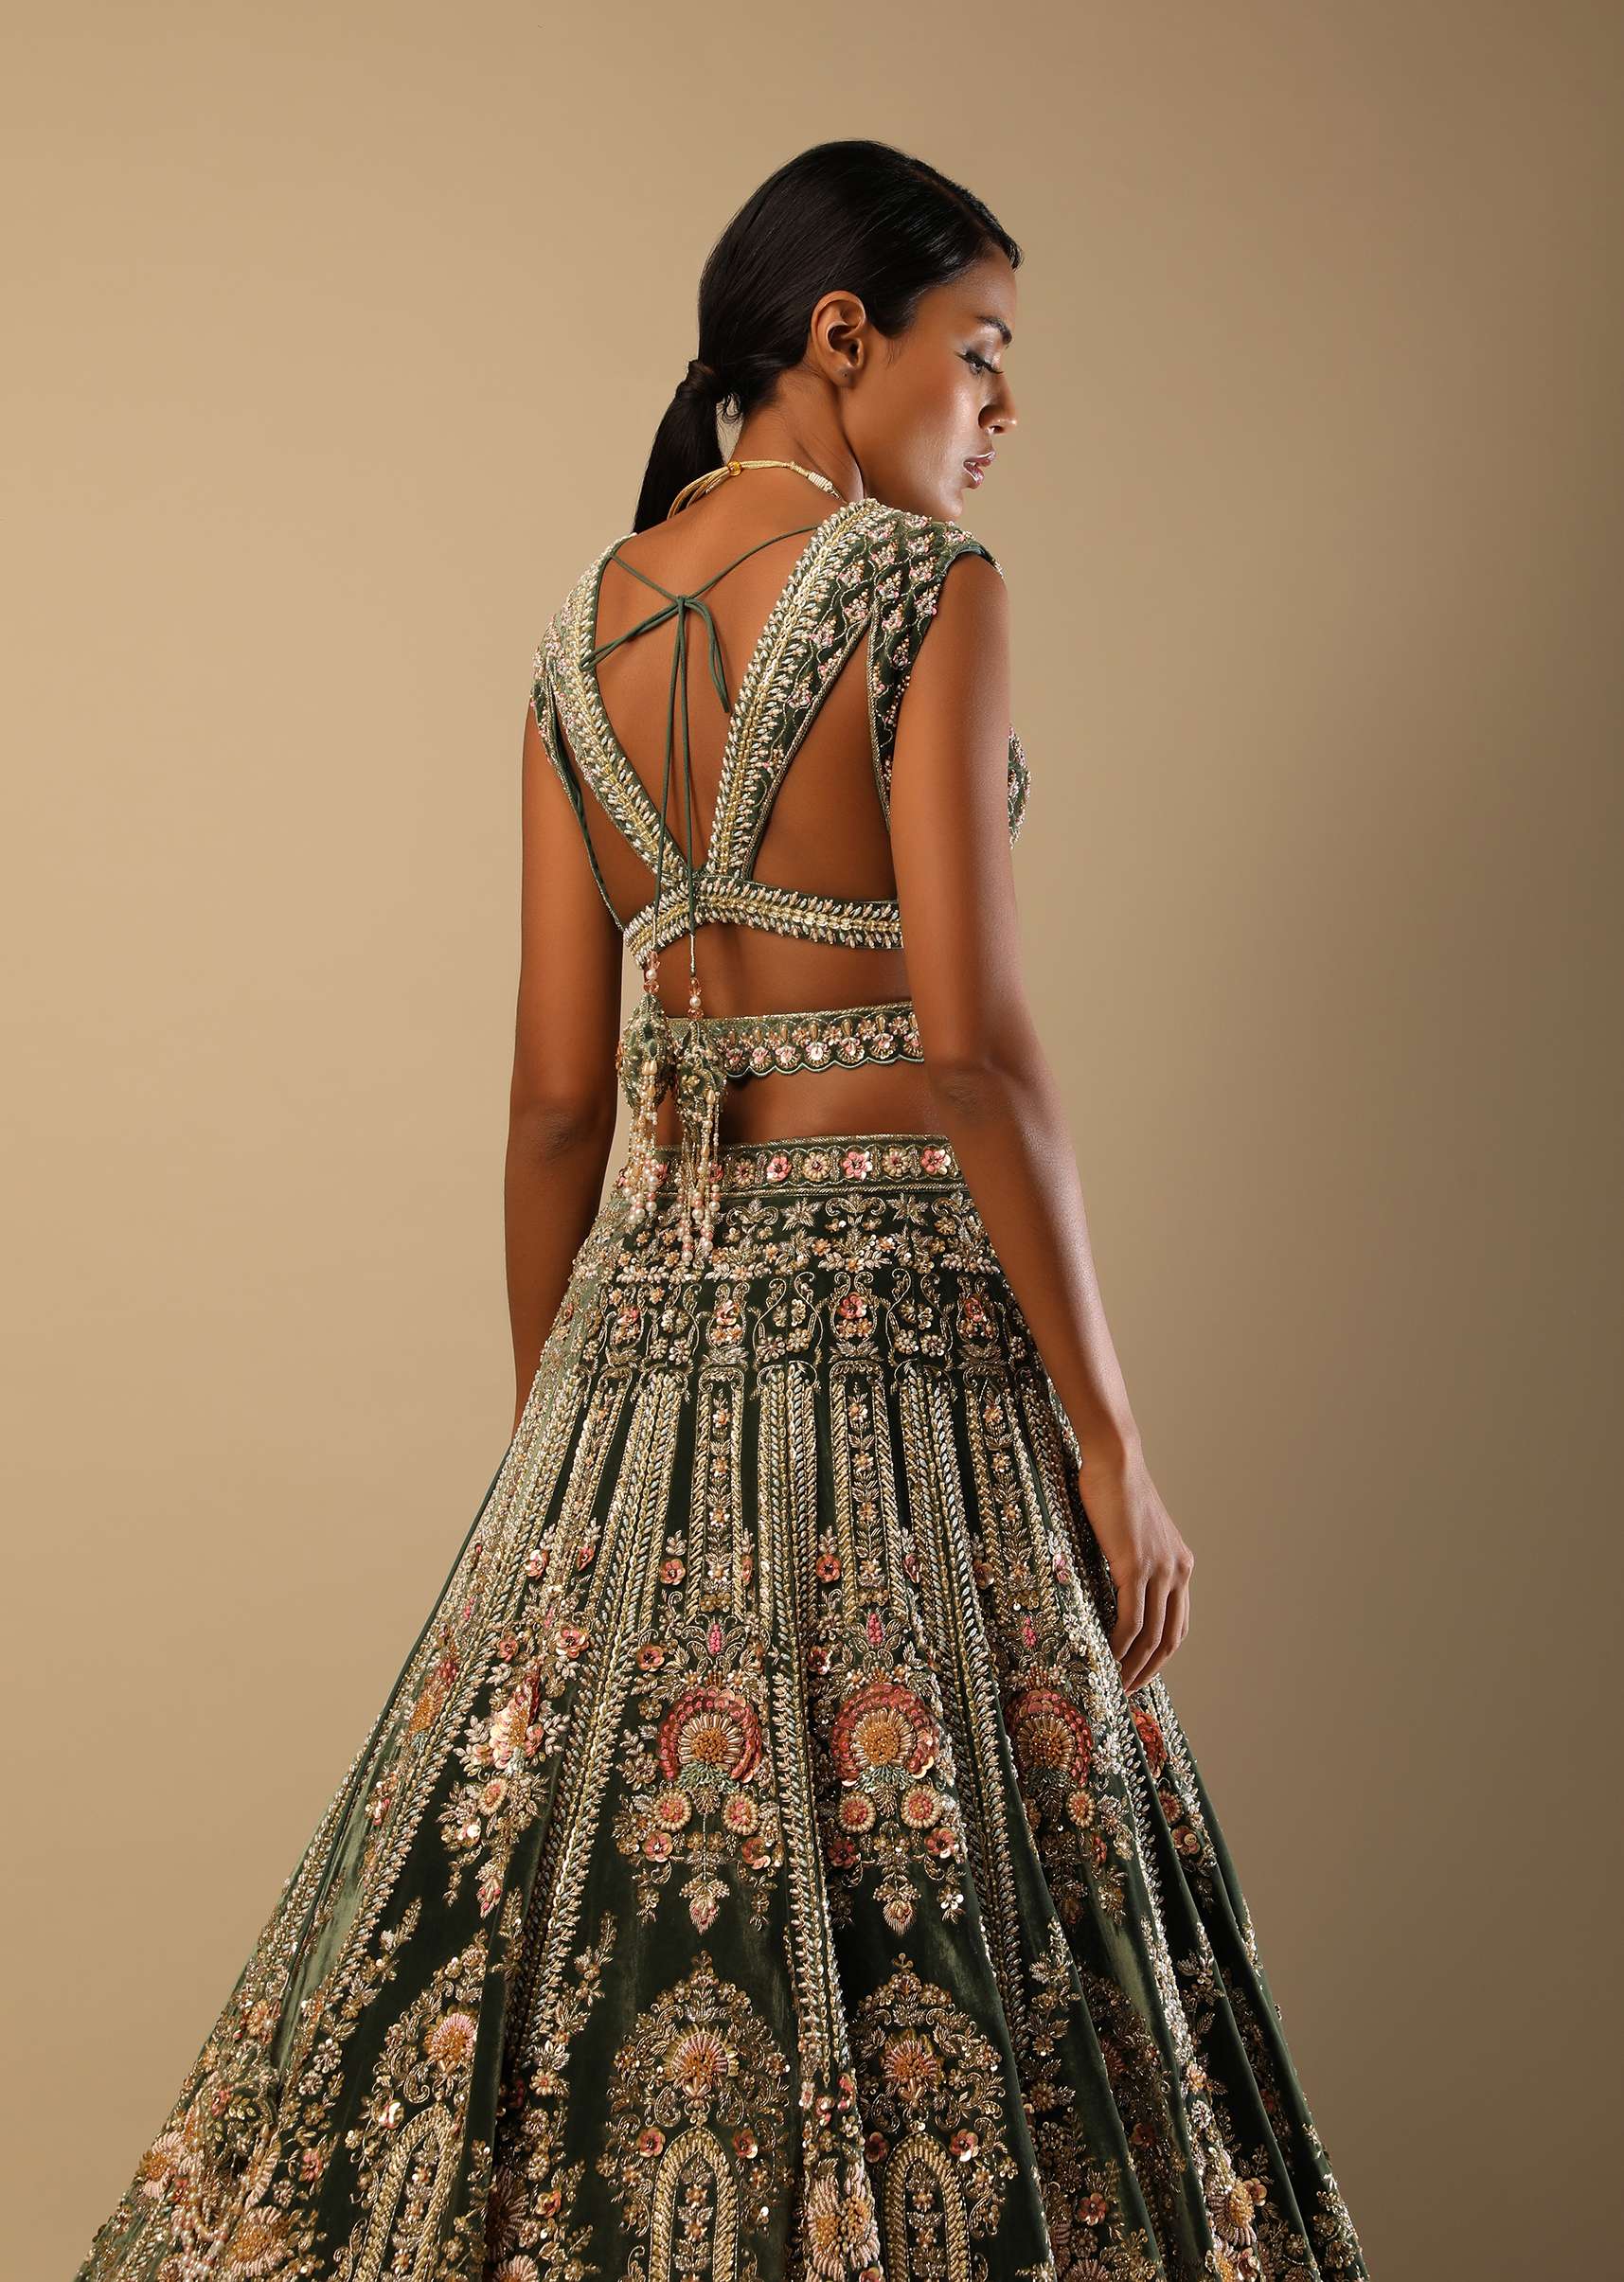 Palace Green Lehenga Choli In Velvet With Multi Colored Hand Embroidered Heritage Kalis With Hints Of Flowers